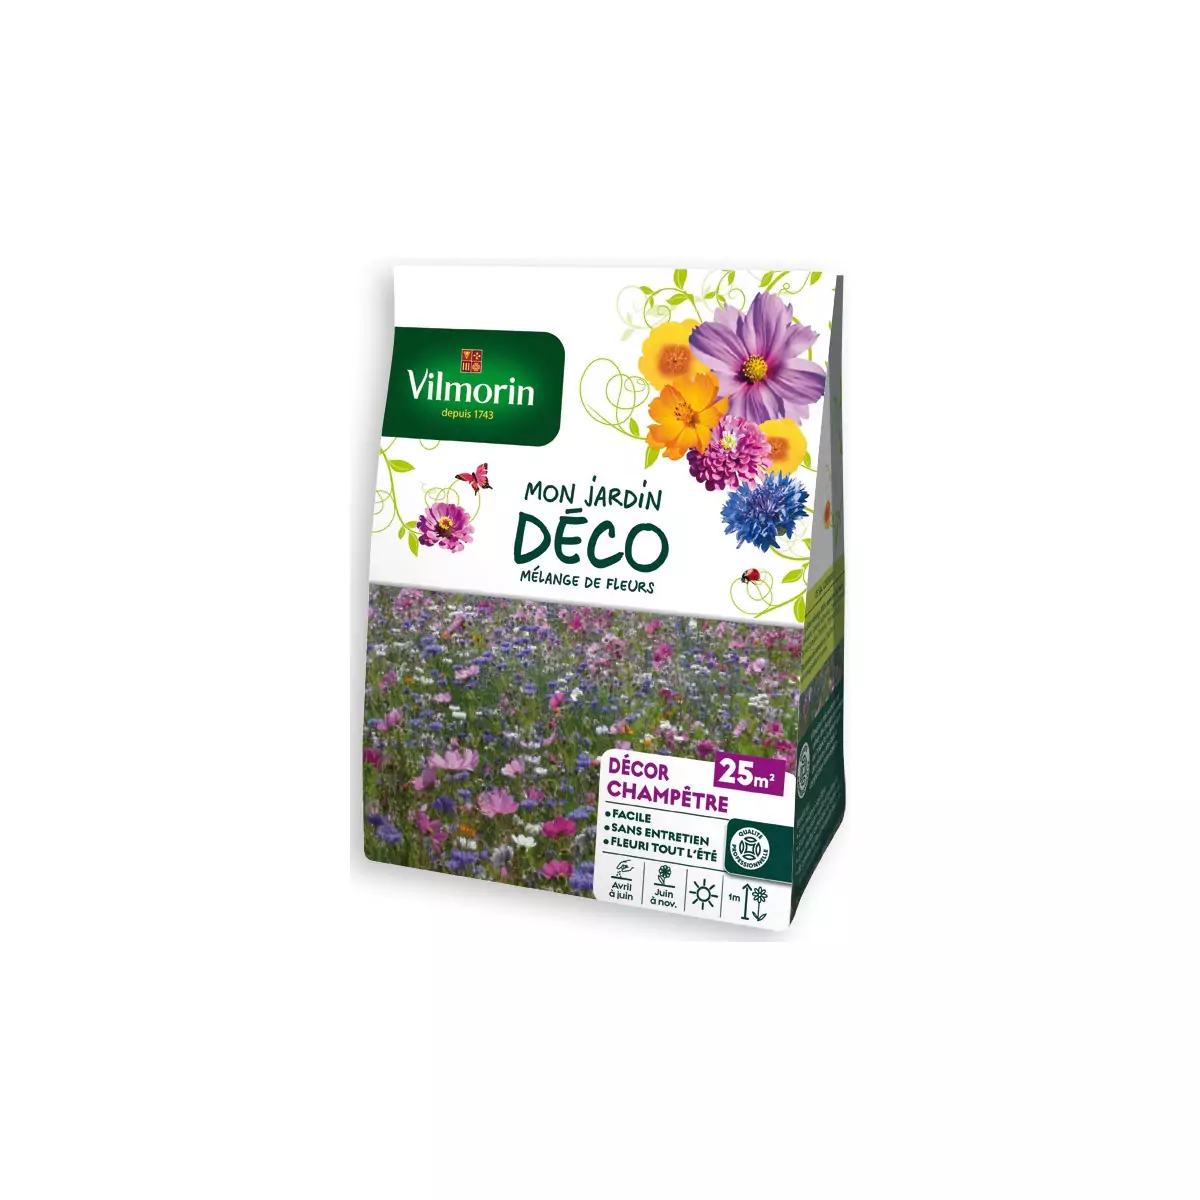 Seeds sachet Mix of country flowers 25m2